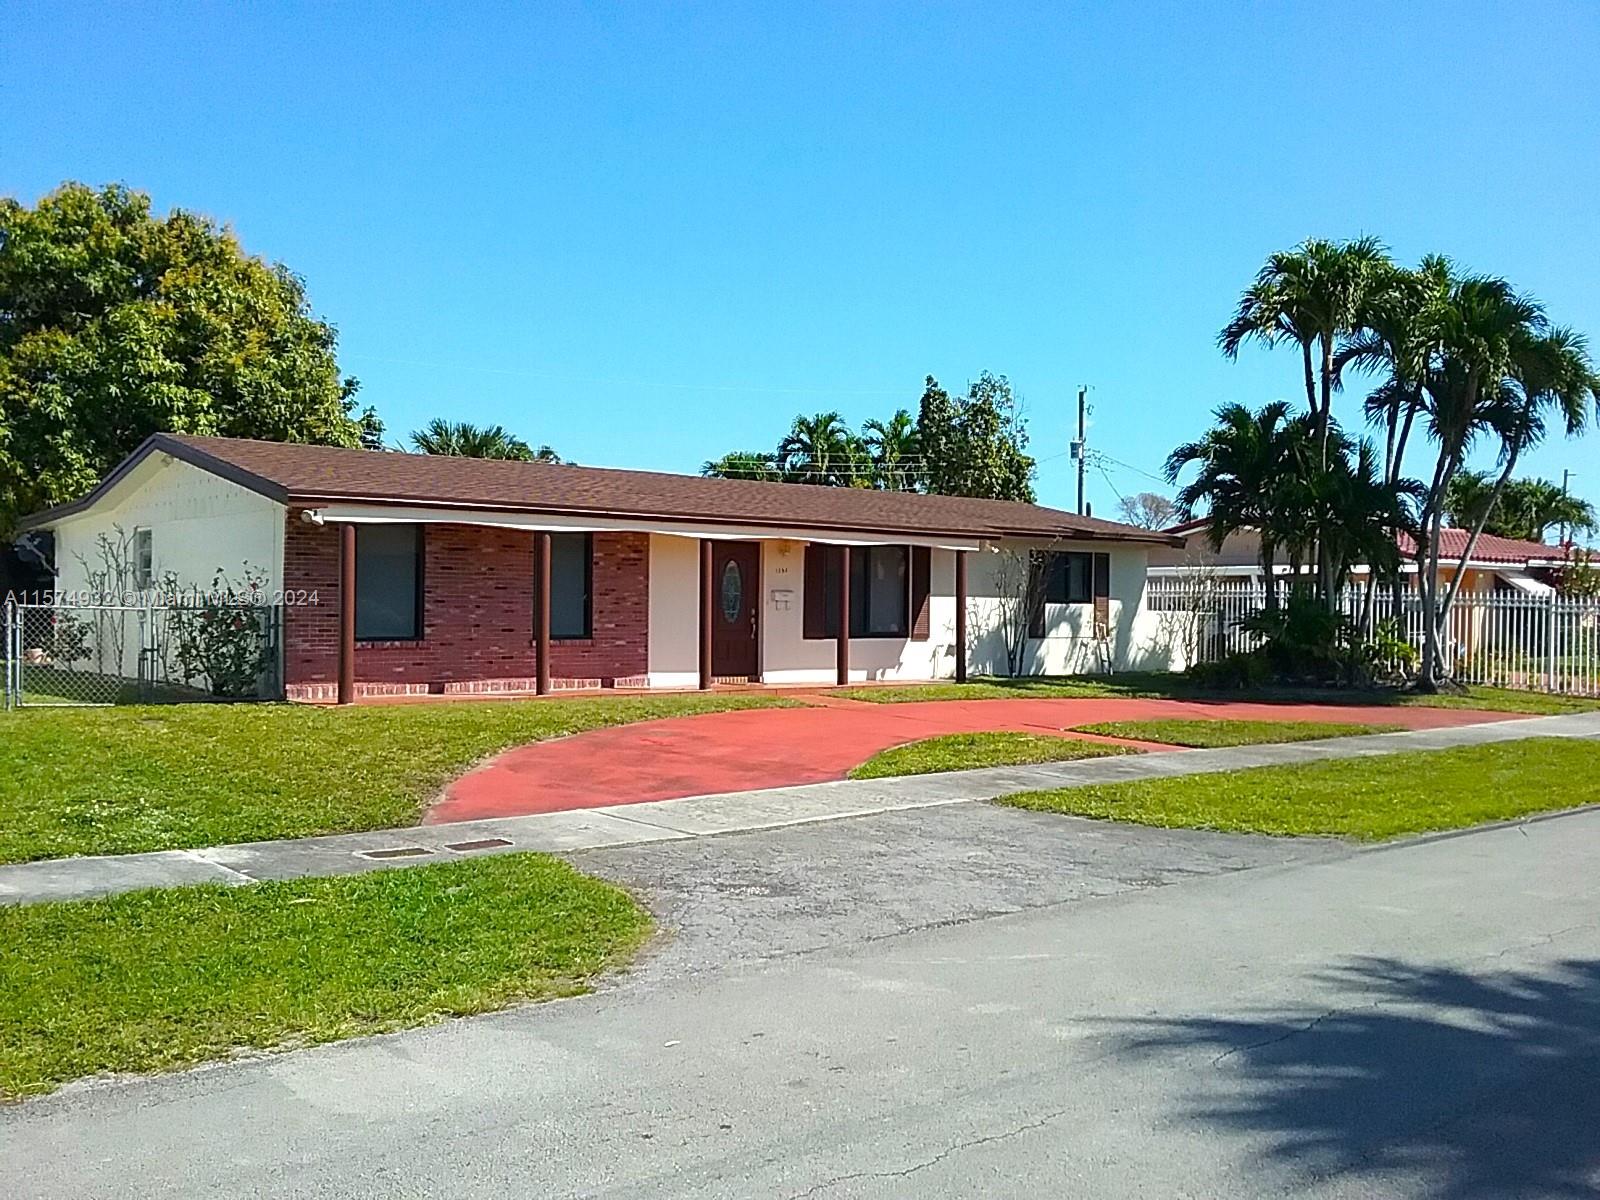 1357 W 78th St, Hialeah, Florida 33014, 2 Bedrooms Bedrooms, ,1 BathroomBathrooms,Residentiallease,For Rent,1357 W 78th St,A11574932